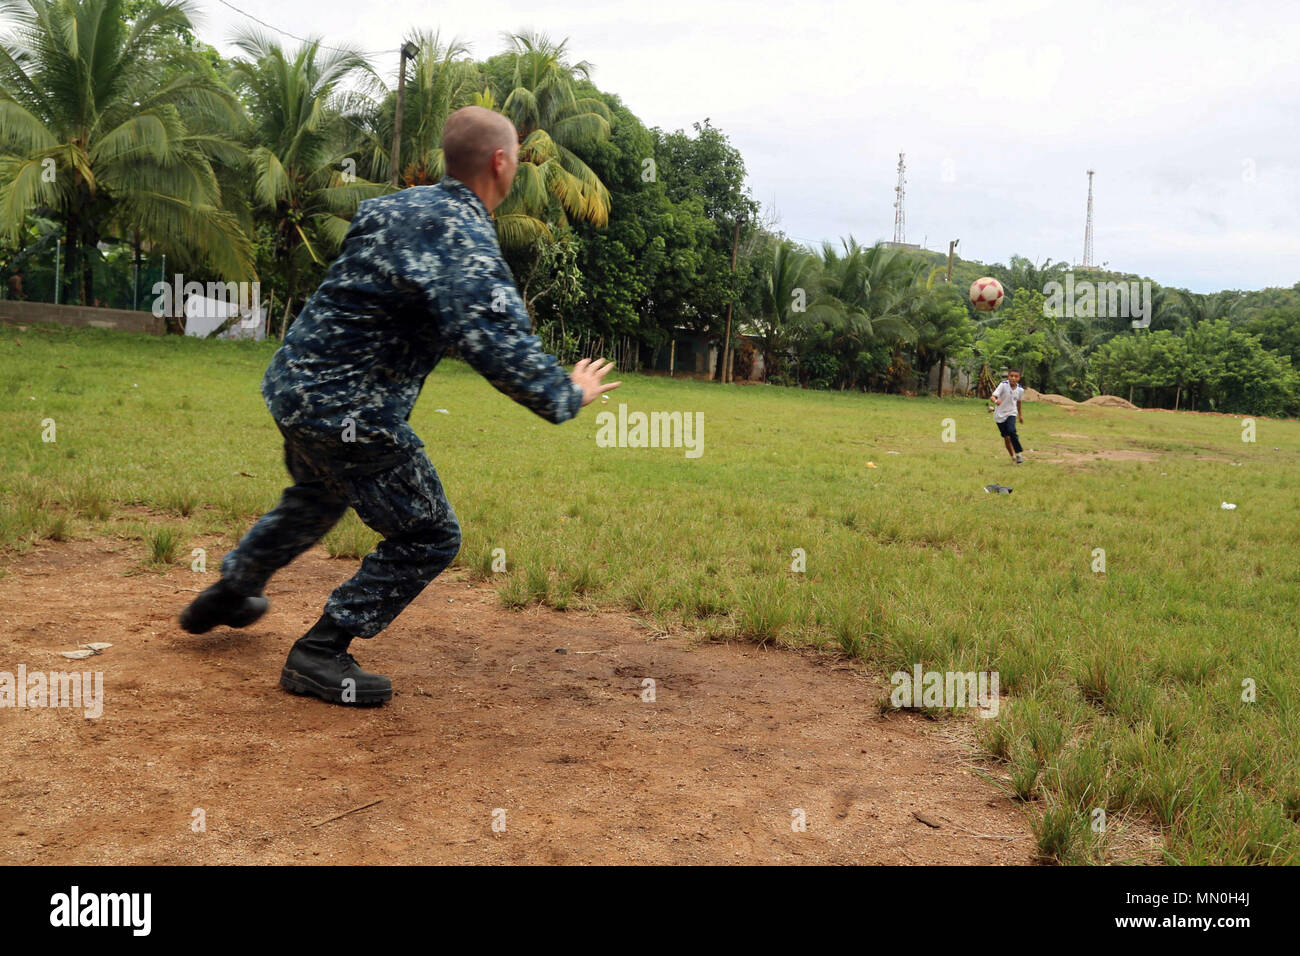 170804-A-QE286-405 TARROS, Honduras (Aug. 4, 2017) U.S. Navy Lt. Cmdr. Ian Sutherland, technical director for the Navy Entomology Center of Excellence, plays soccer with Honduran elementary school students at Escuela Rural Mixta Luz Infantil, during a Southern Partnership Station 17 community relations (COMREL) project. SPS-EPF 17 is a U.S. Navy deployment, executed by U.S. Naval Forces Southern Command/U.S. 4th Fleet, focused on subject matter expert exchanges with partner nation militaries and security forces in Central and South America. (U.S. Army photo by SPC Judge Jones/Released) Stock Photo